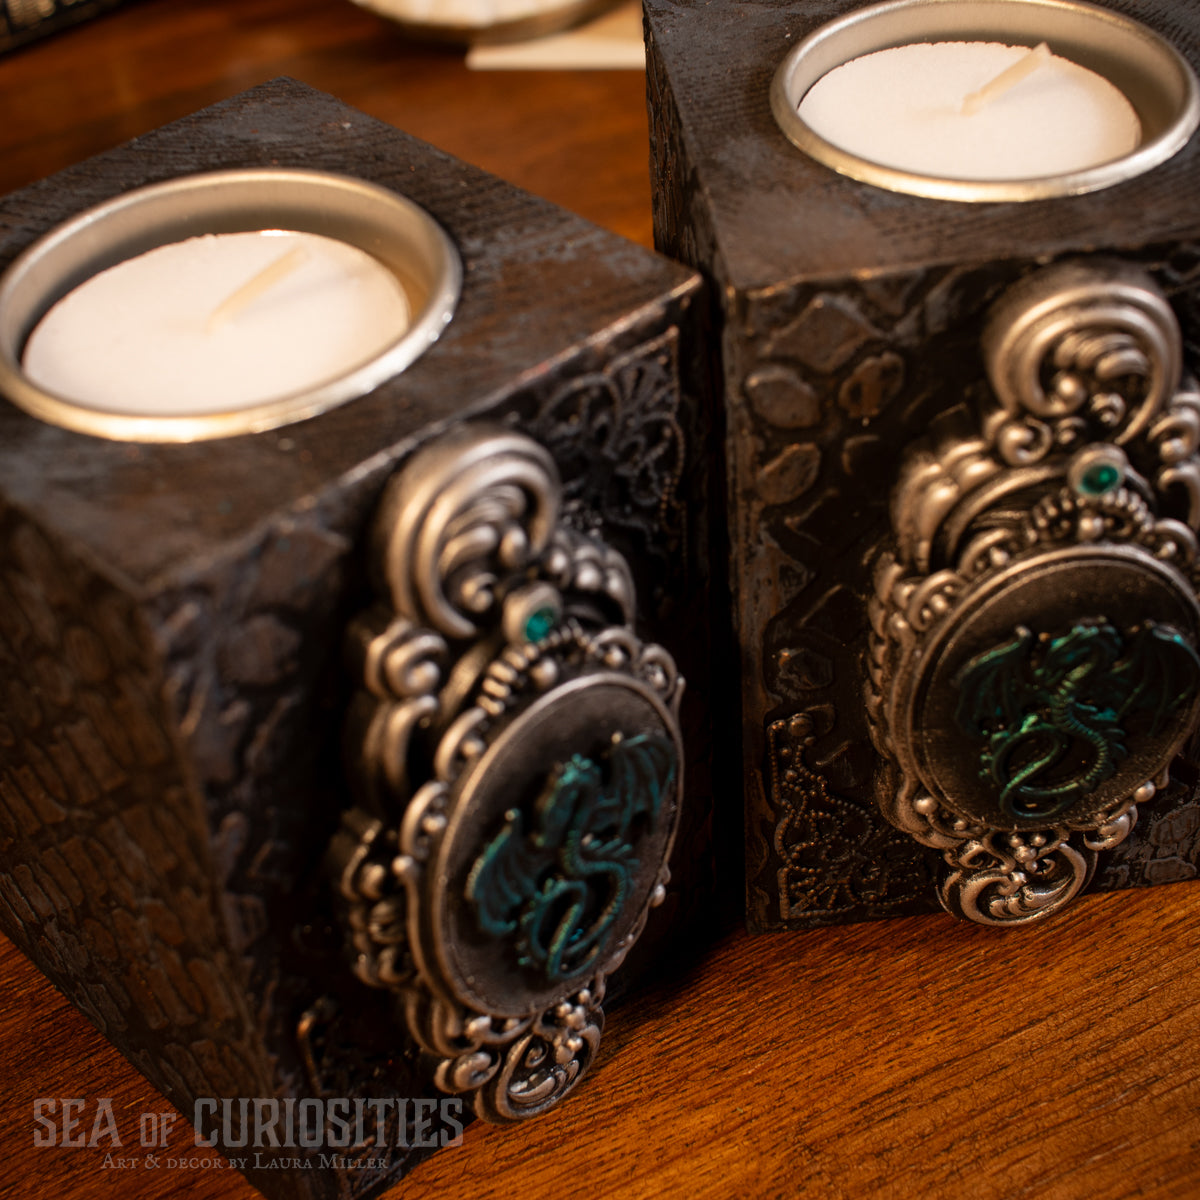 Dragon - Tall Gothic/Witchy Tealight Holders (sold individually)